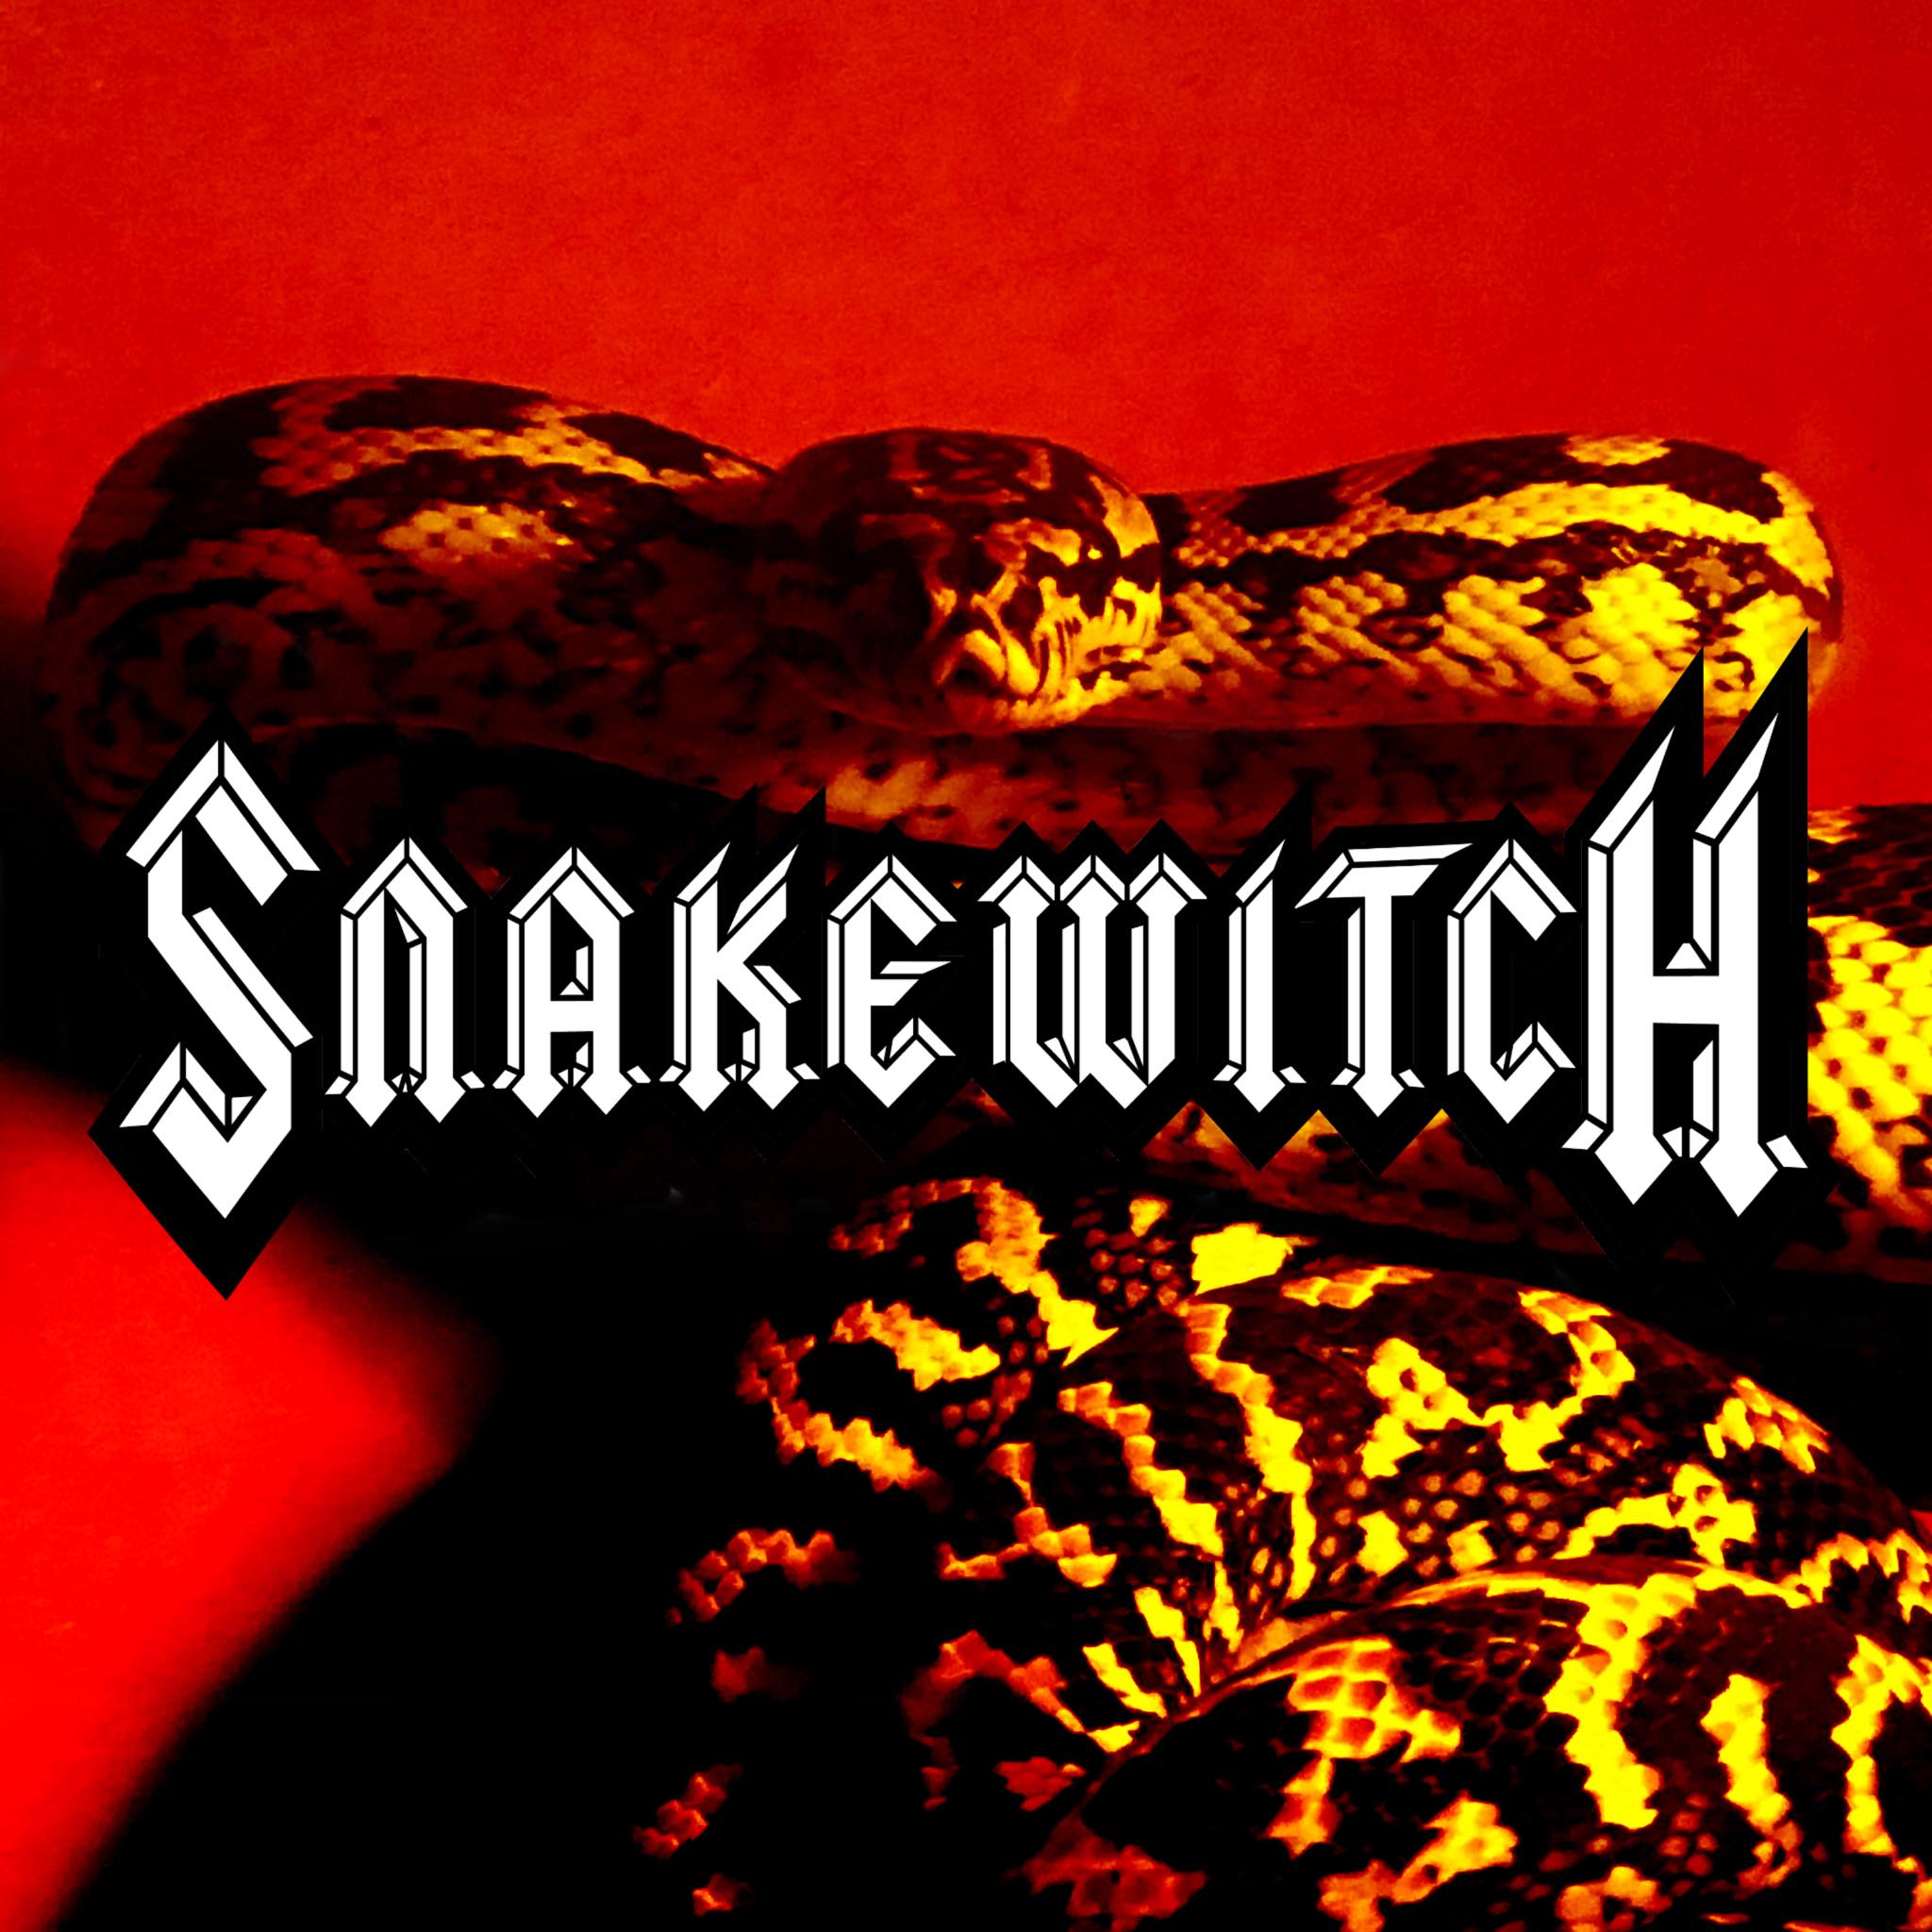 snakewitch